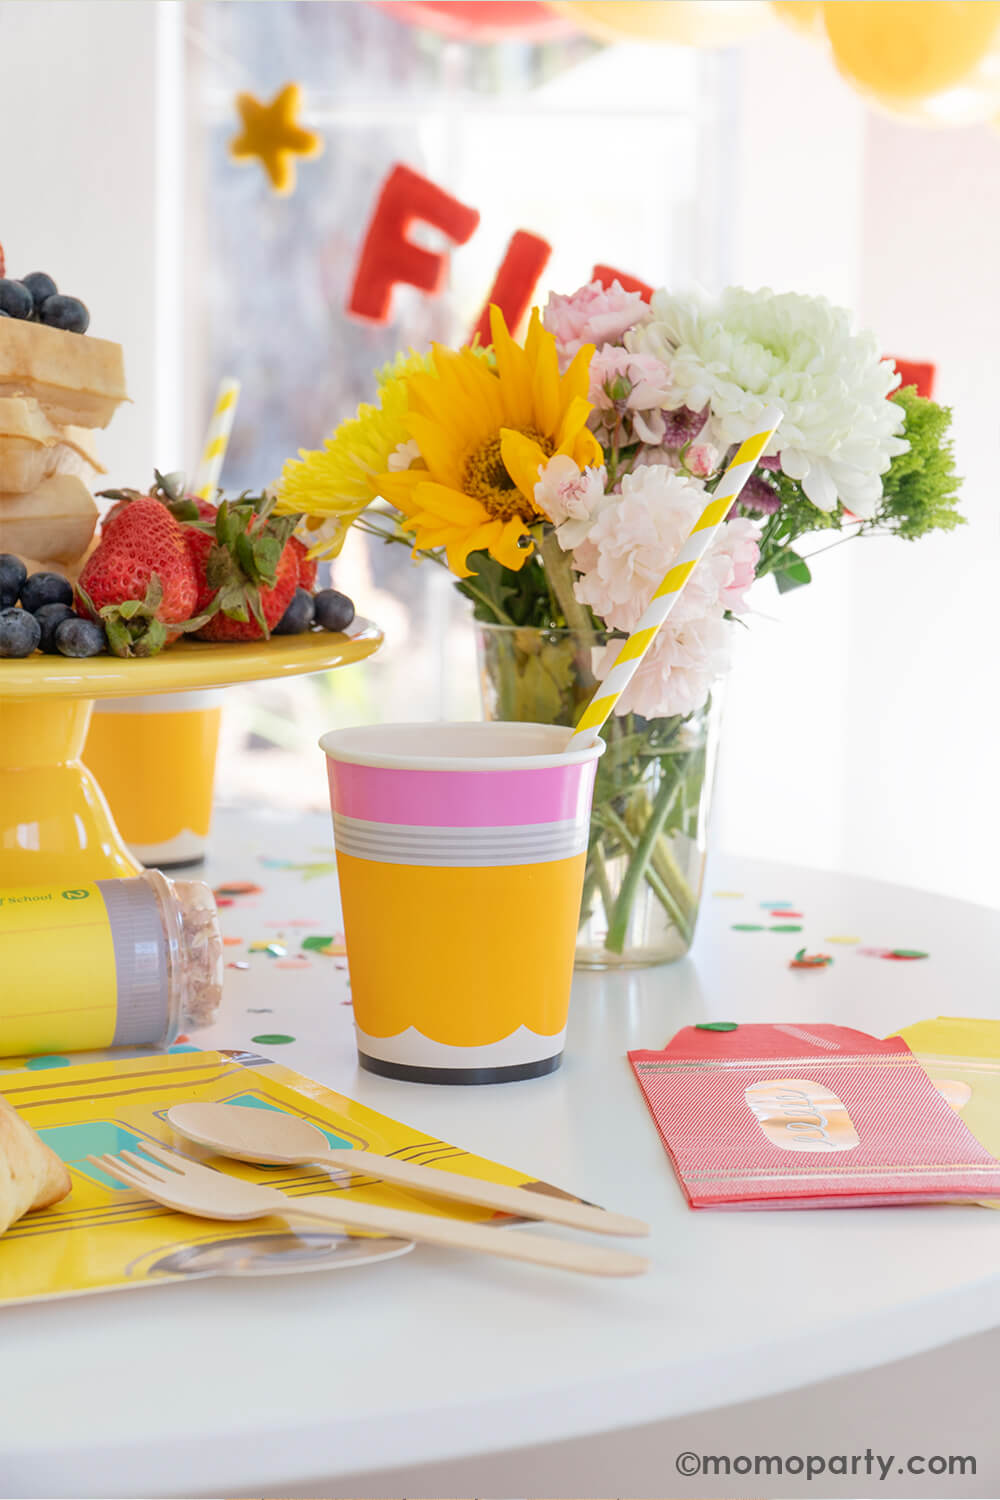 A first day of school breakfast celebration party table by Momo Party featuring pencil shaped party cups, school bus shaped plates, and colorful crayon shaped napkins. Along with the felt "first day of school" party banner in the back and fresh floral arrangement as the centerpiece, it makes great inspiration for an at home back to school party.